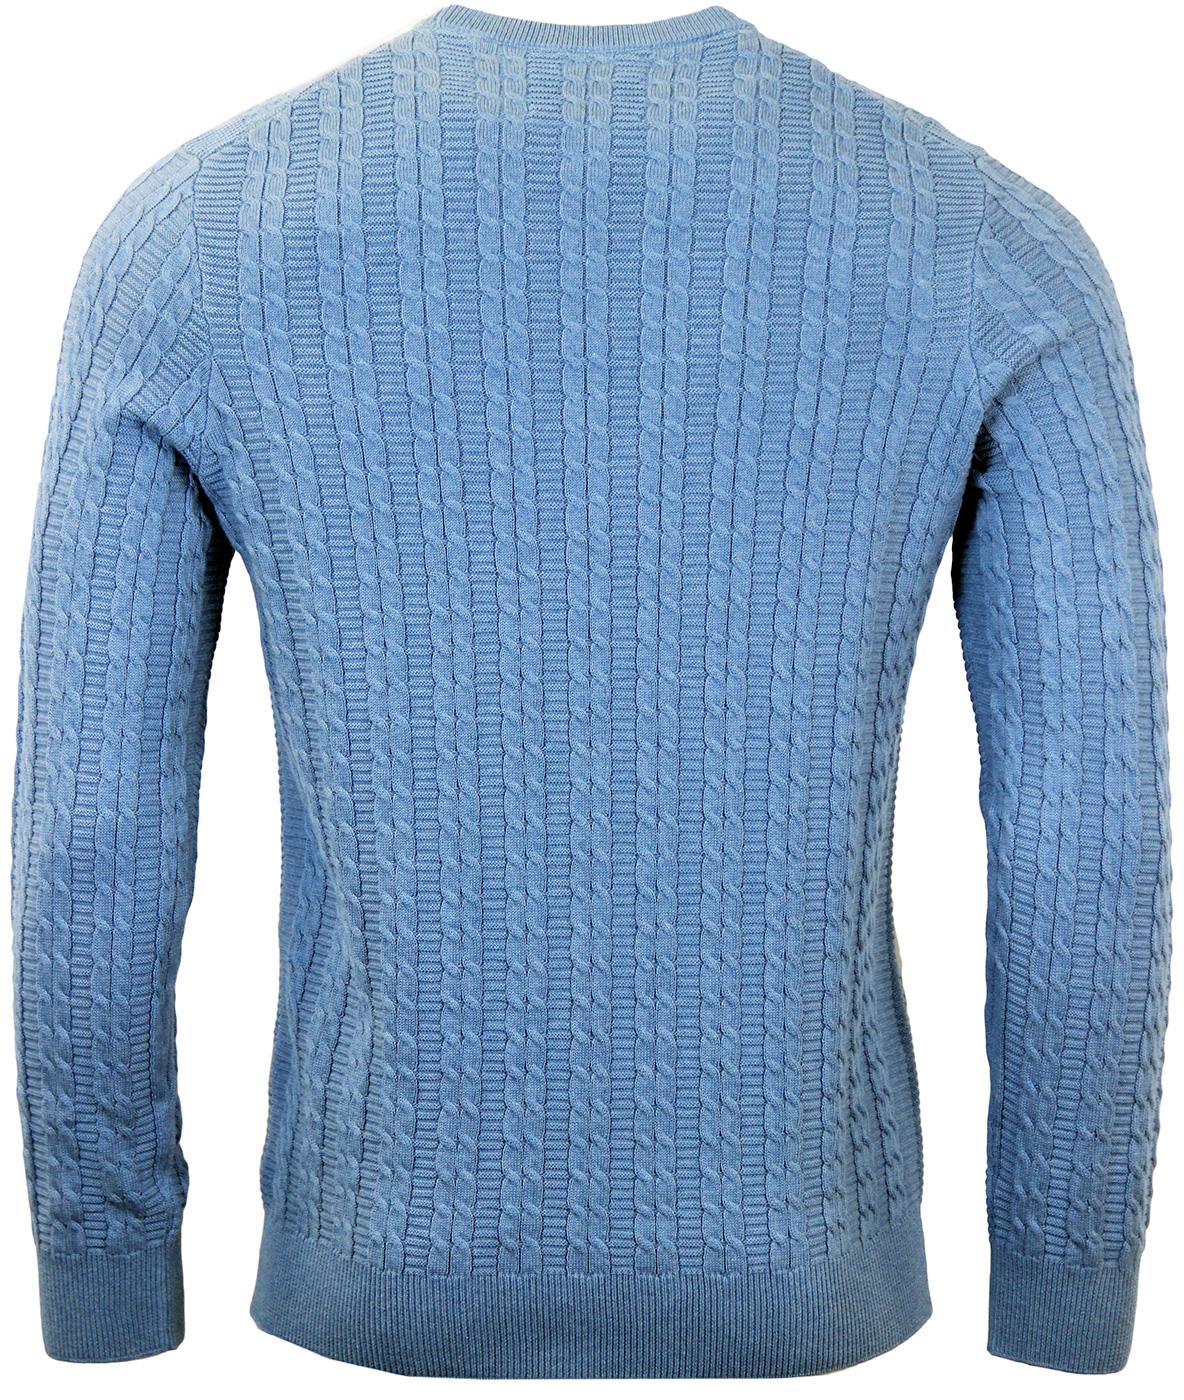 LYLE & SCOTT Retro Mod Cable Knit Ribbed Jumper in Dusky Blue